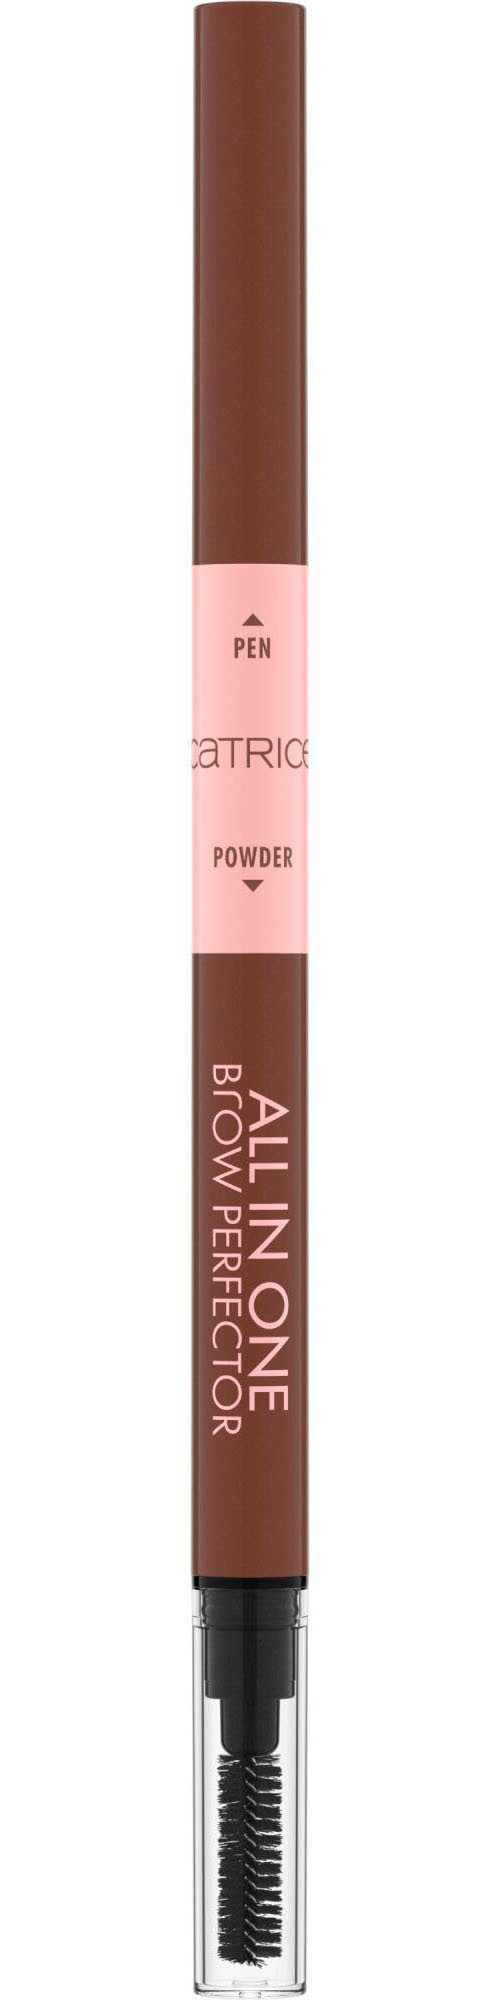 Catrice Augenbrauen-Stift All In One Brow Perfector